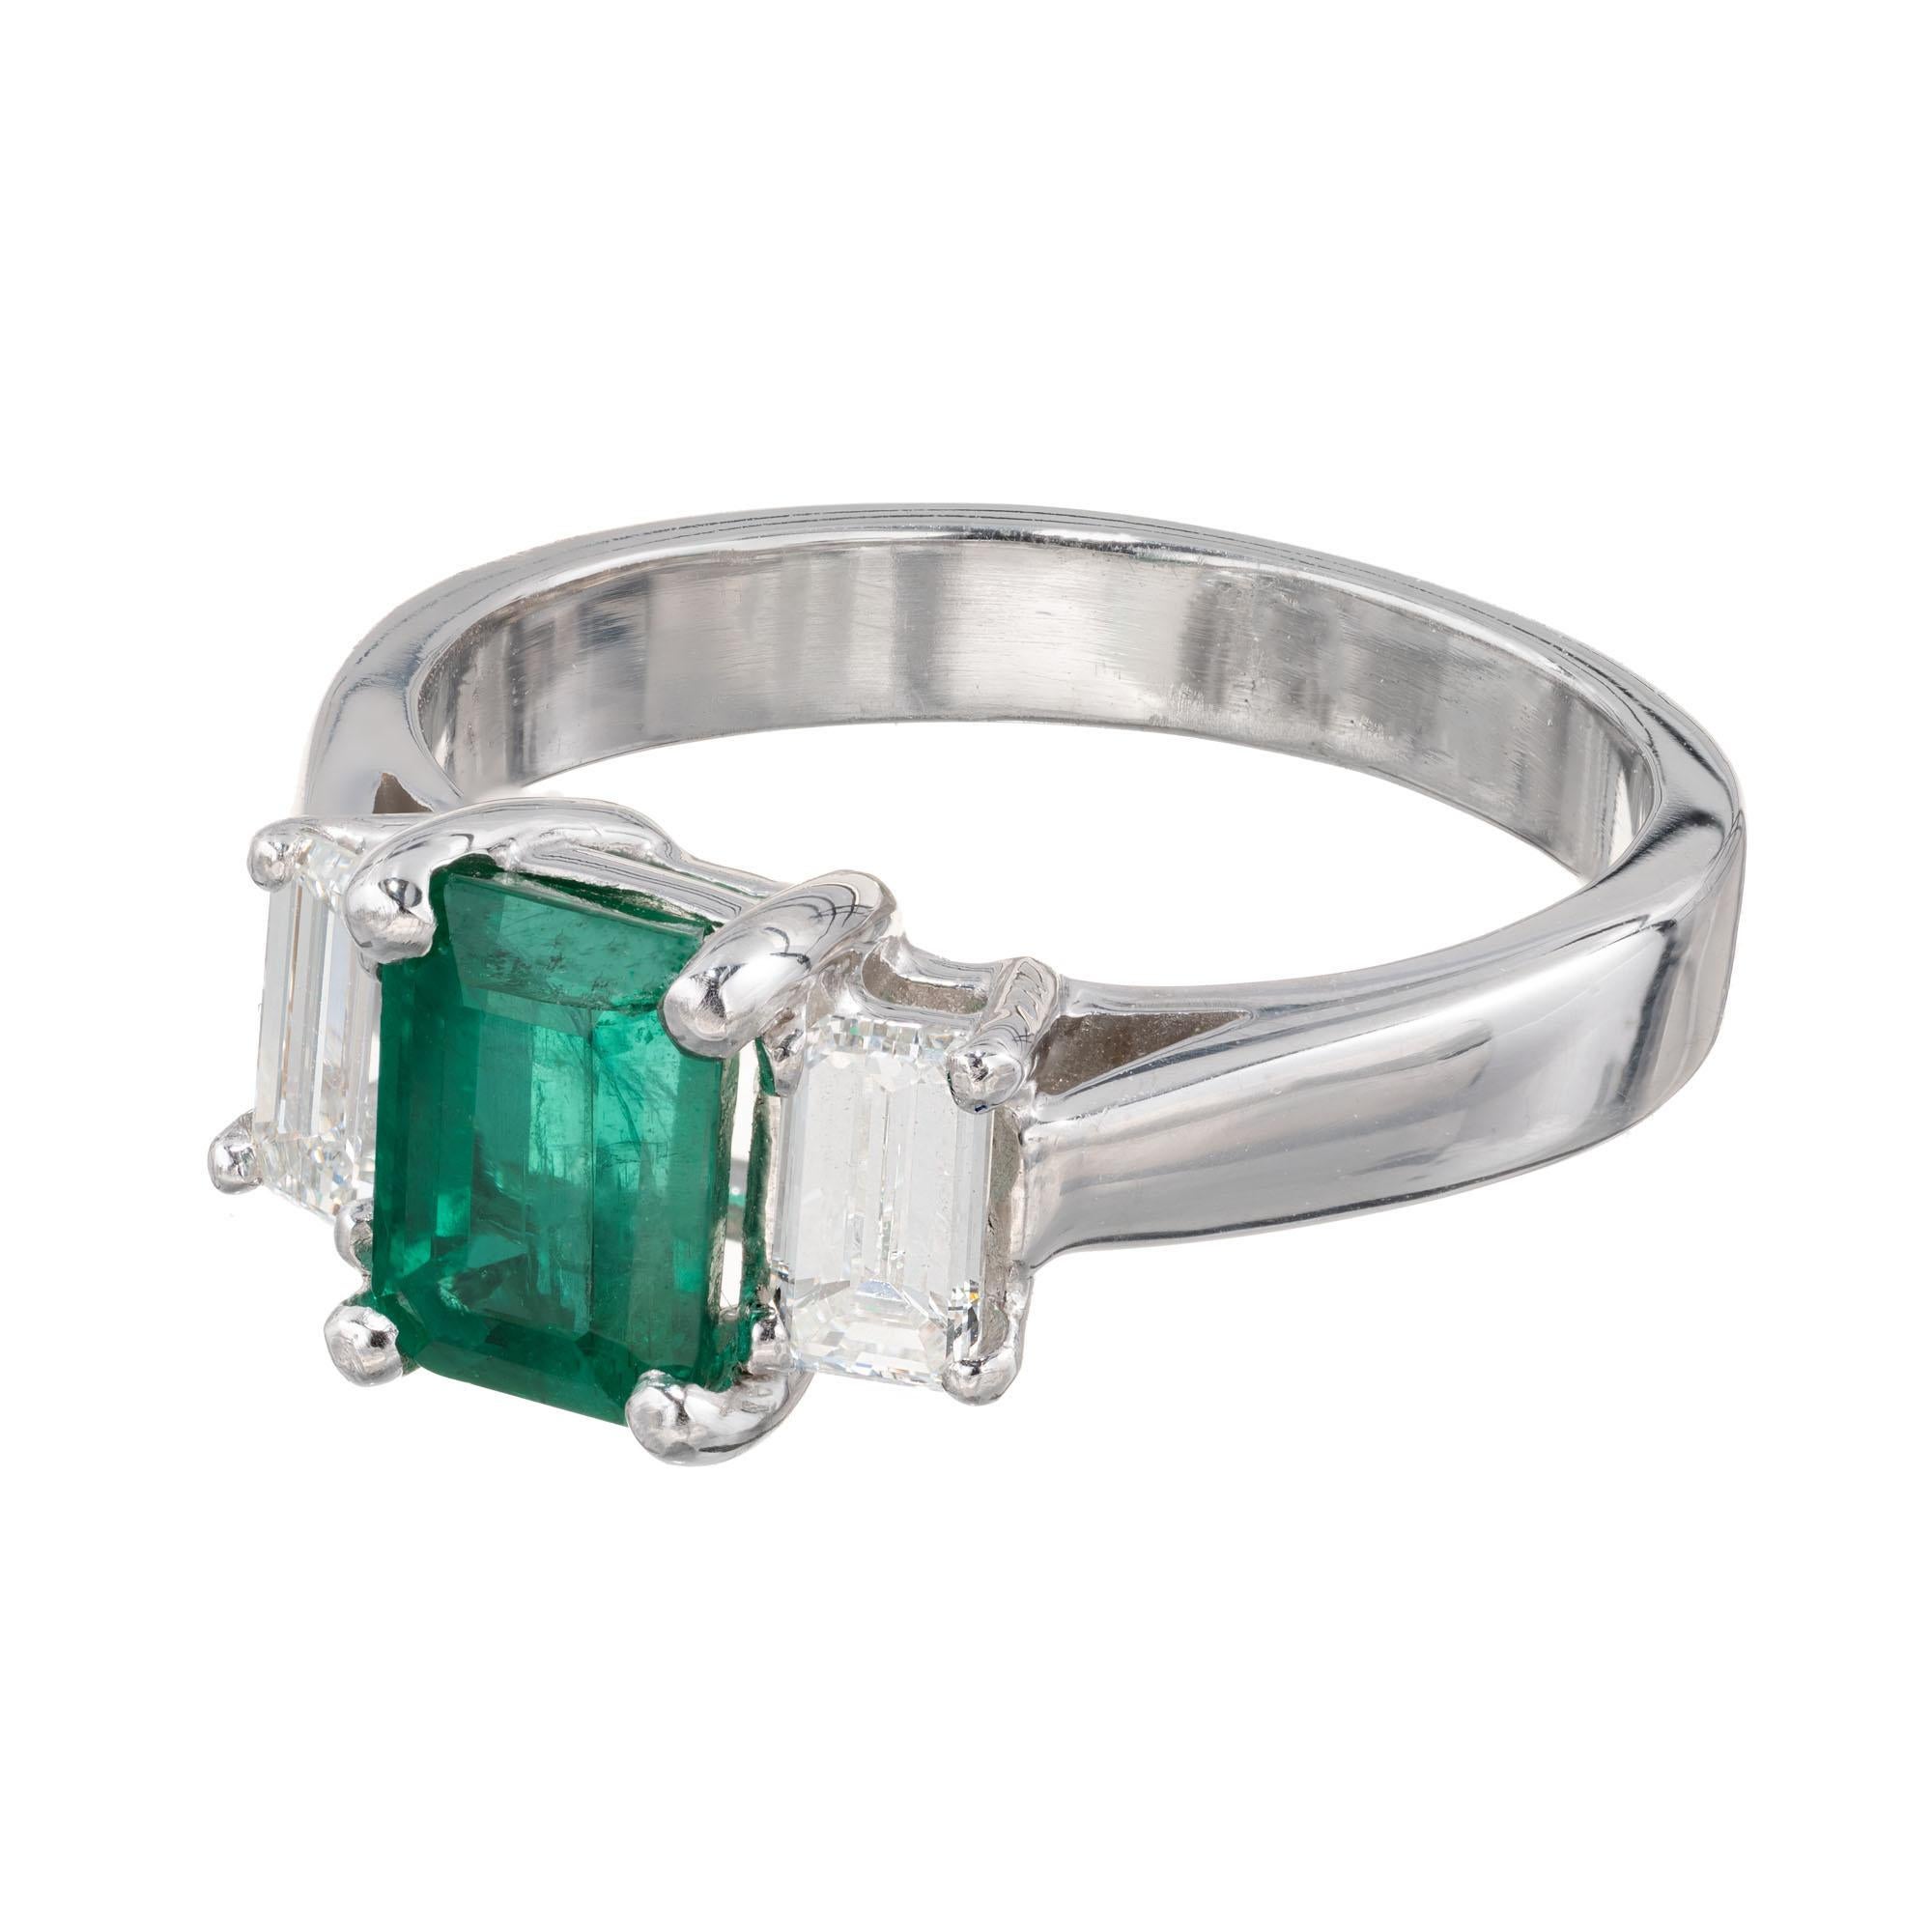 Peter Suchy three-stone emerald and diamond engagement ring. Emerald center stone with two emerald cut side diamonds in a platinum setting created by the Peter Suchy Work Shop. GIA certified.  

1 octagon cut green emerald MI, approx. 1.11cts GIA